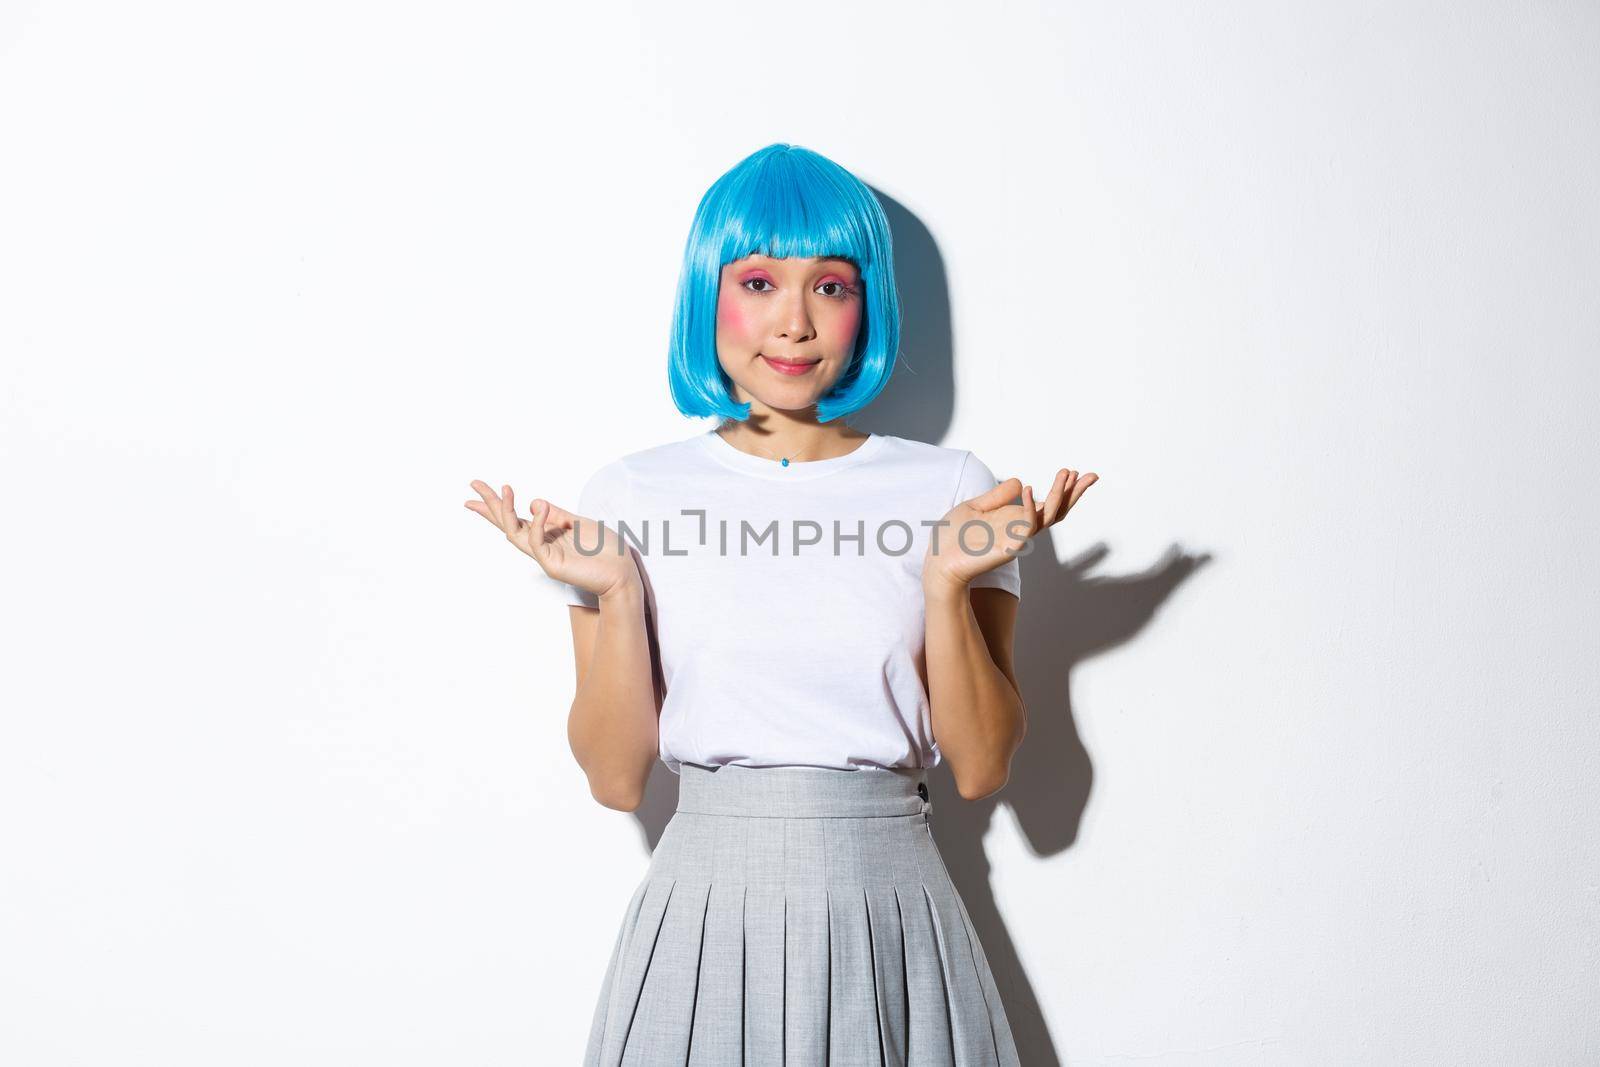 Portrait of clueless young asian party girl in blue wig shrugging, looking indecisive at camera, standing over white background.